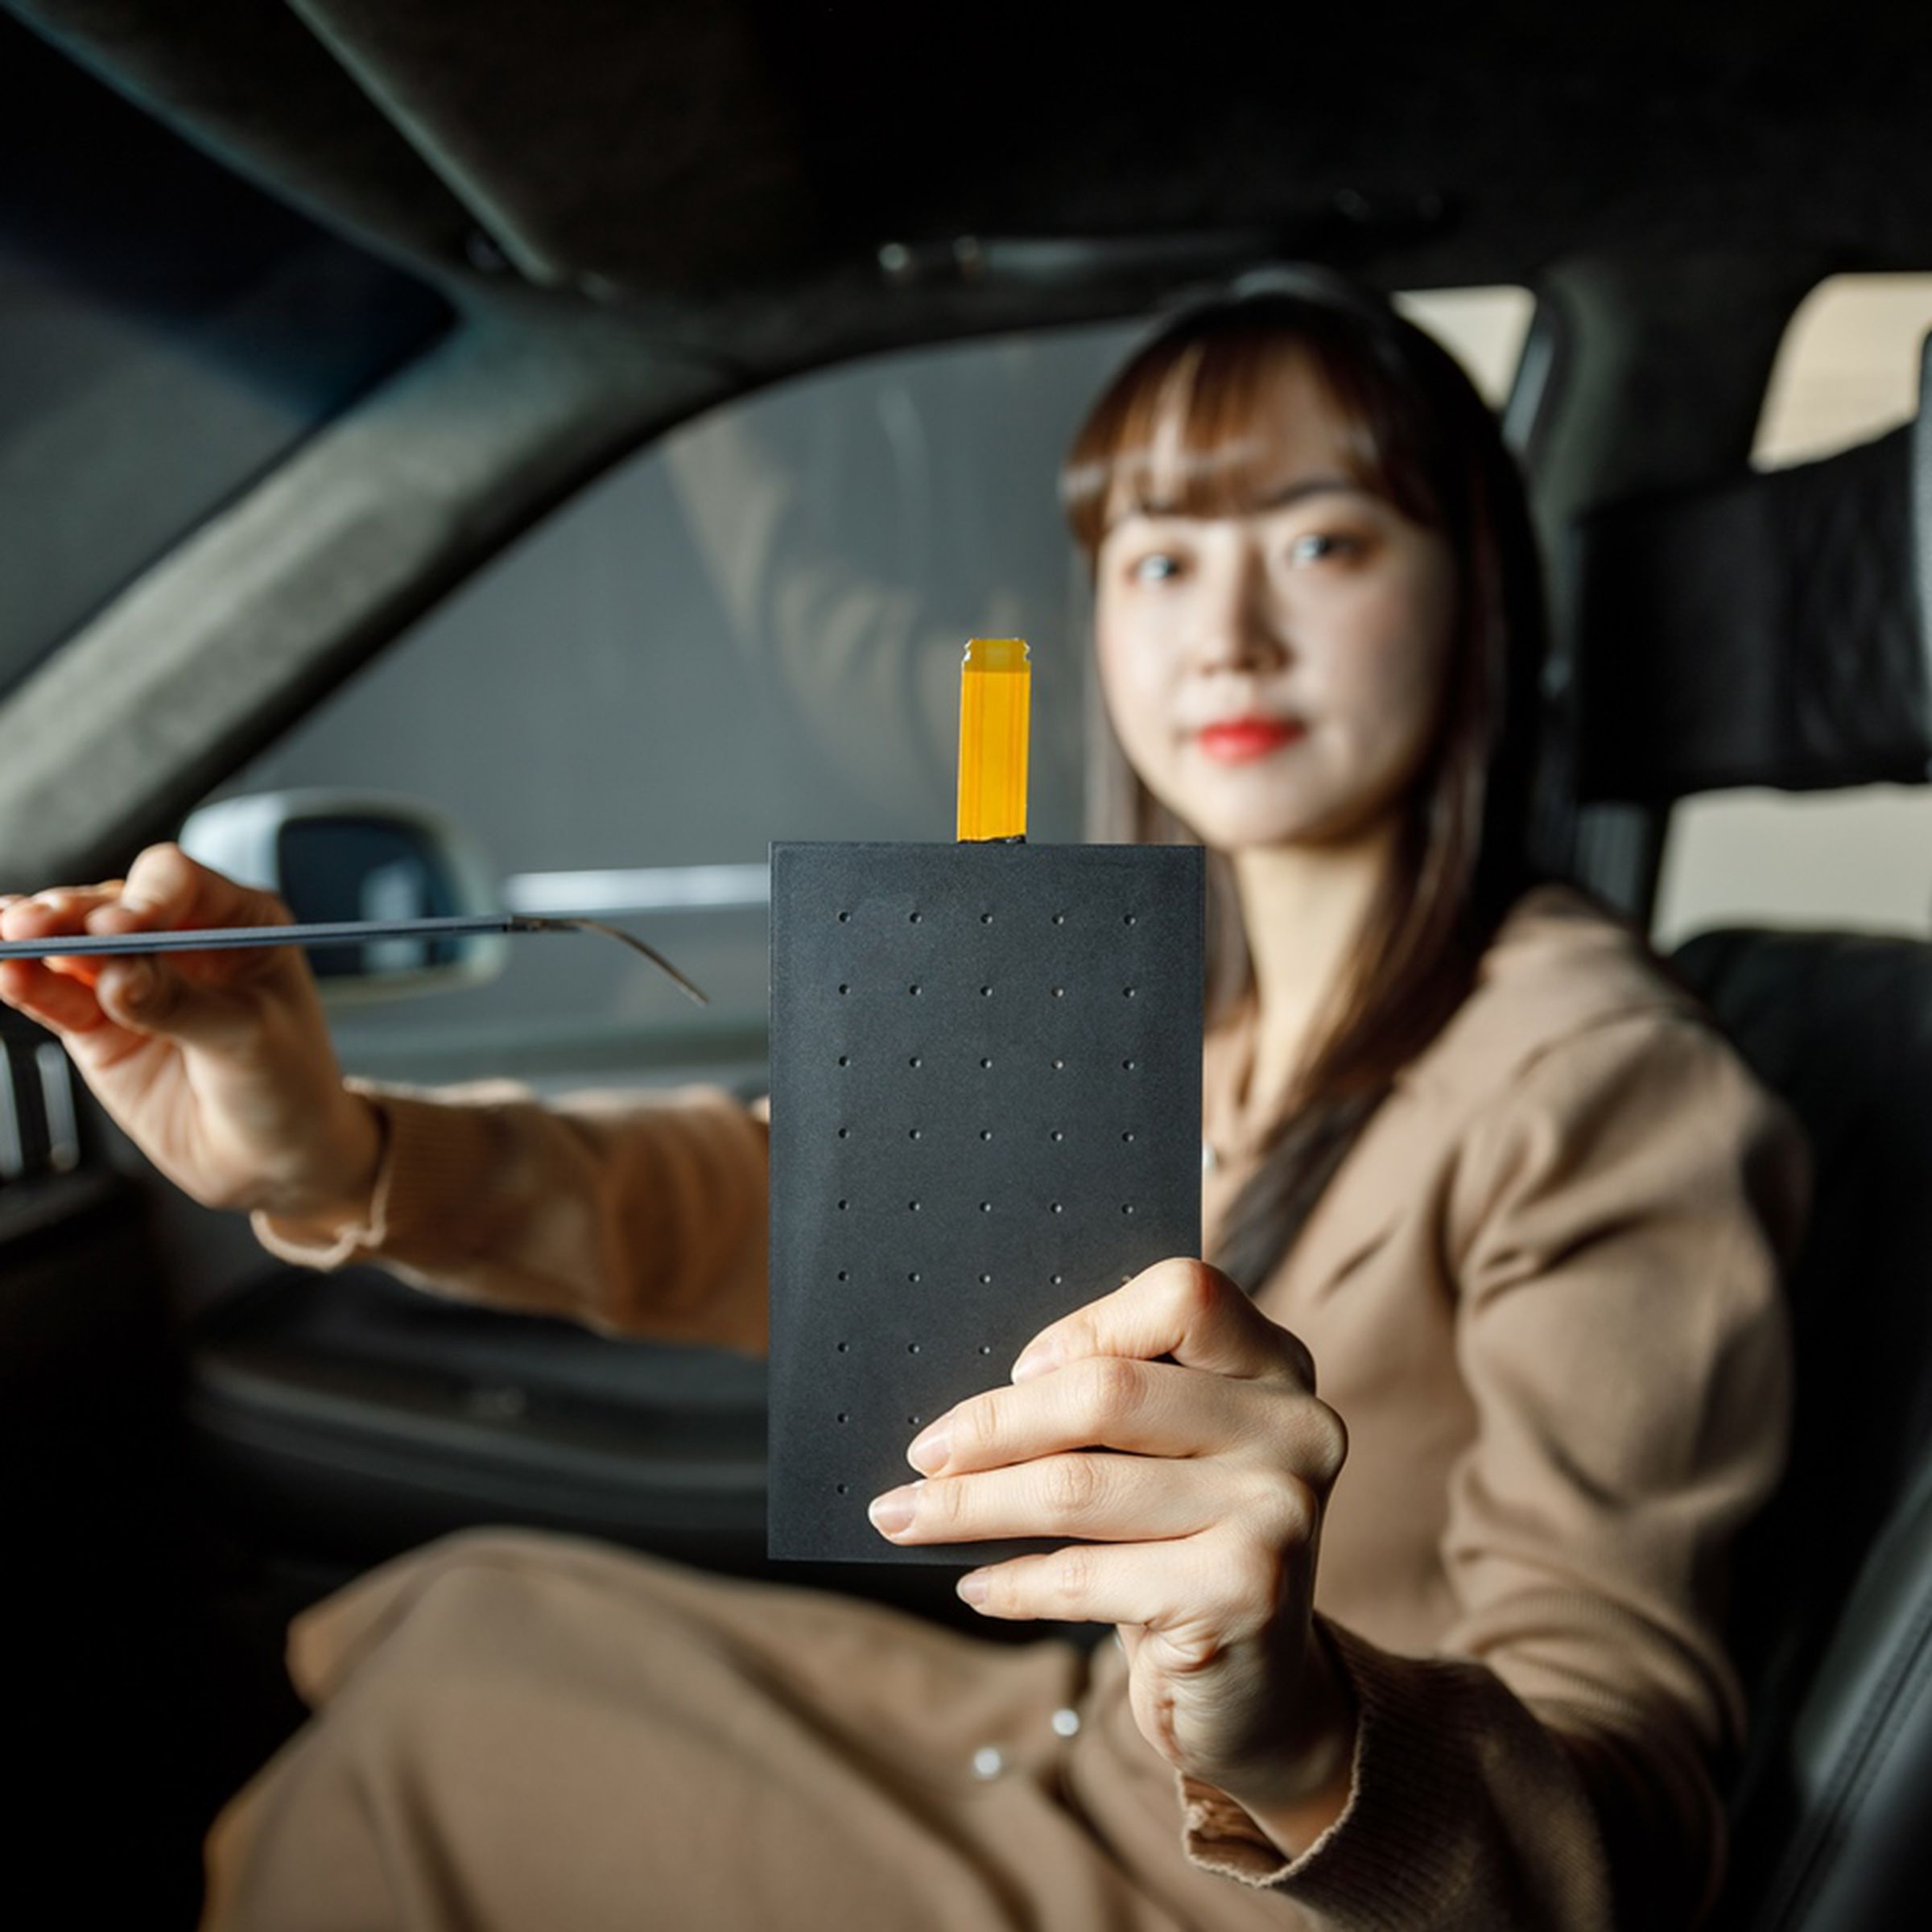 A woman in a car, holding LG Display’s Thin Actuator Sound Solution panel. The panel is a slim, black slab of plastic-looking material.